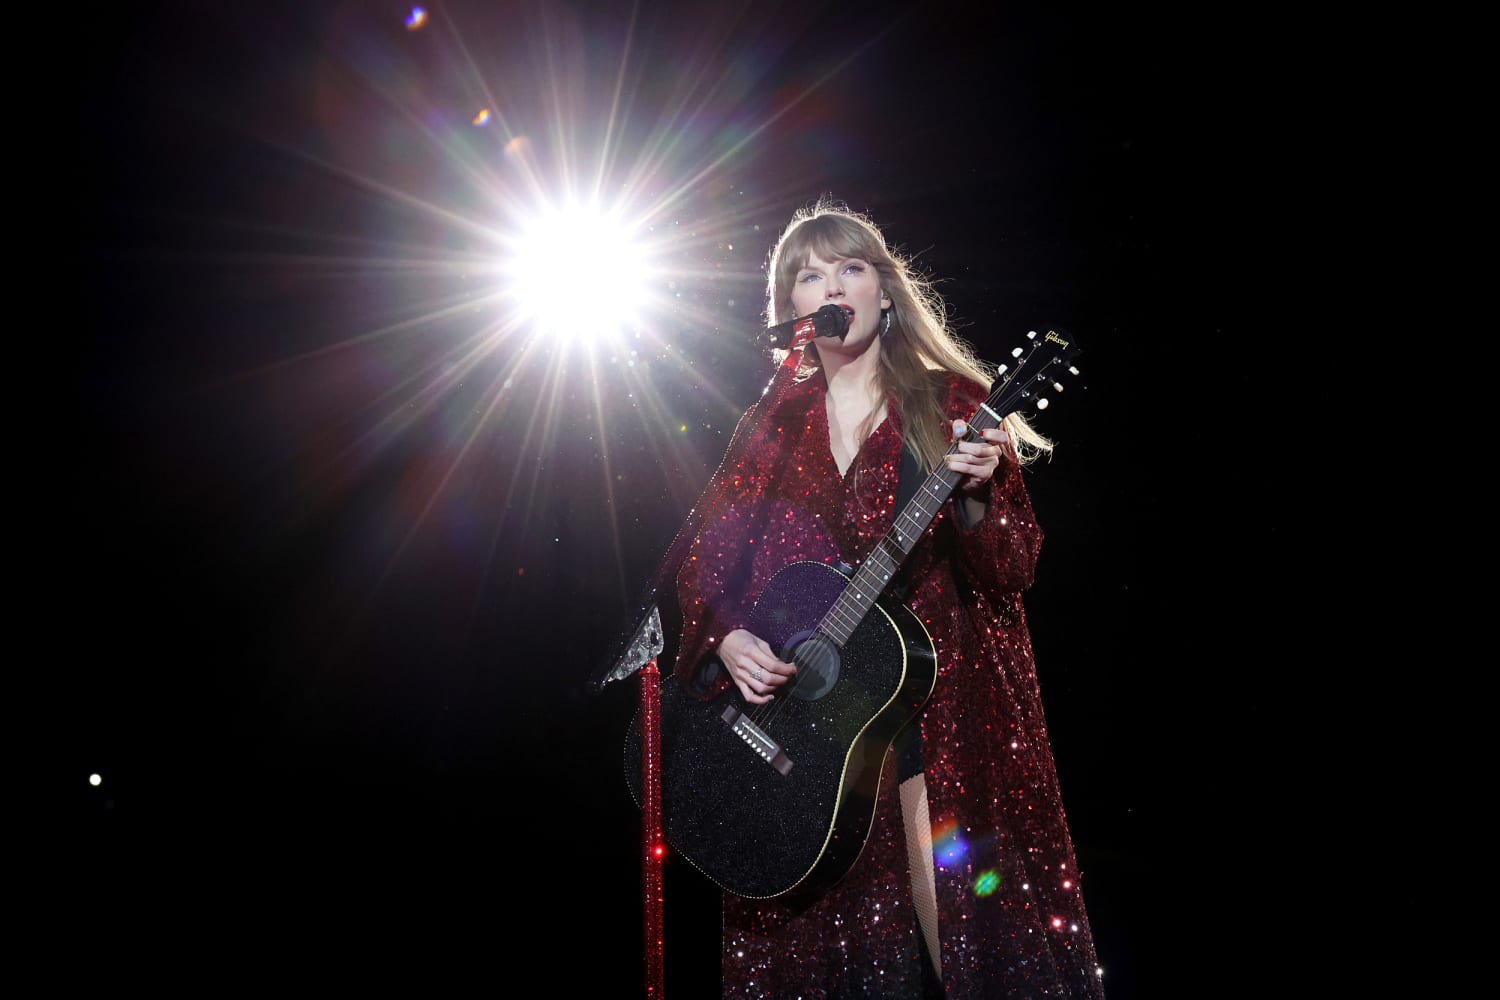 Federal Reserve credits Taylor Swift with boosting hotel revenues through blockbuster 'Eras' tour